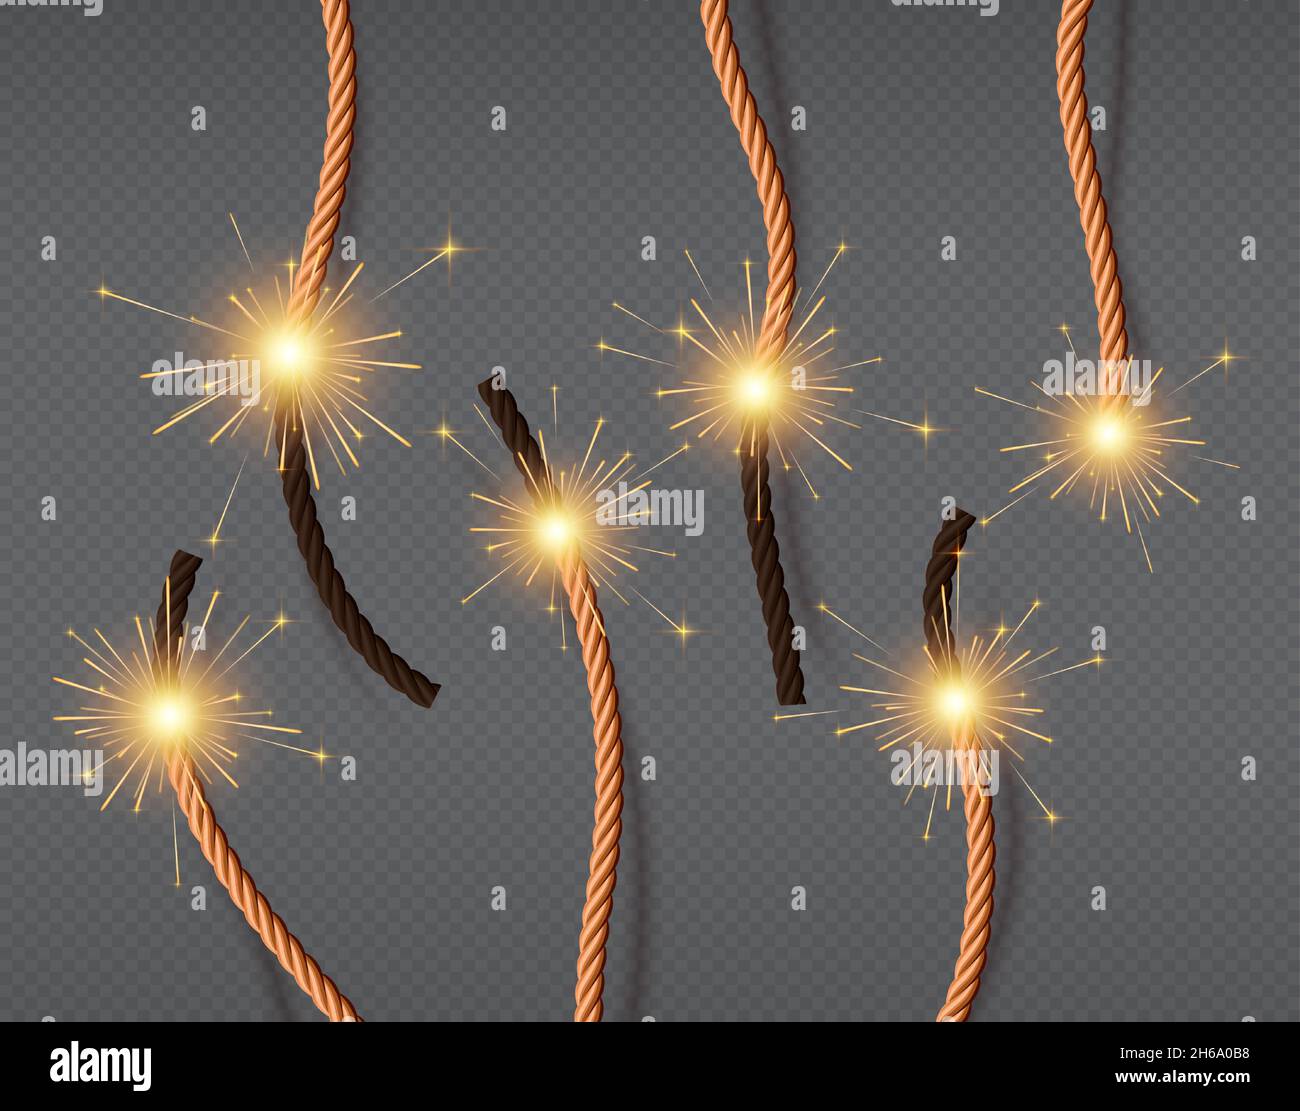 Realistic burning fire wicks, lighted dynamite fuses. Firecracker or fireworks twisted ropes with flames. Lit fuse cord of bombs, vector set Stock Vector